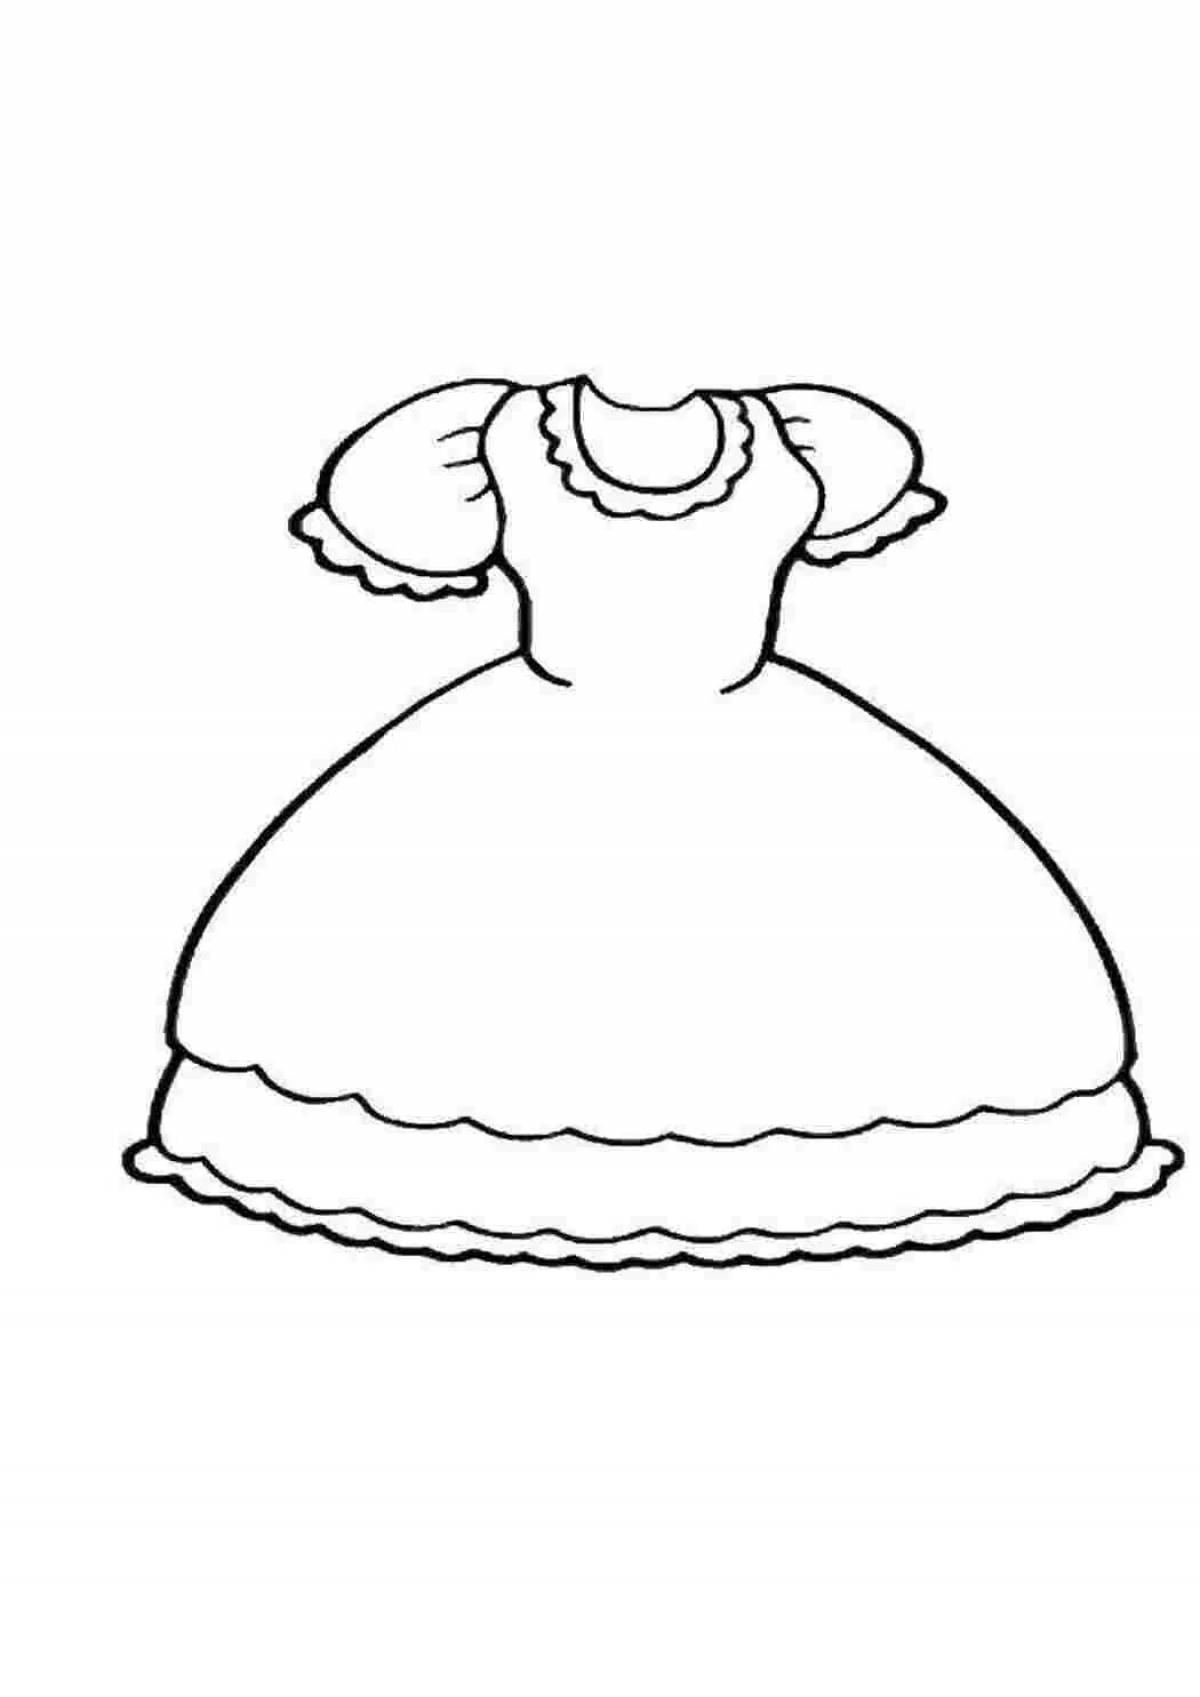 Coloring page glamorous puffy dress